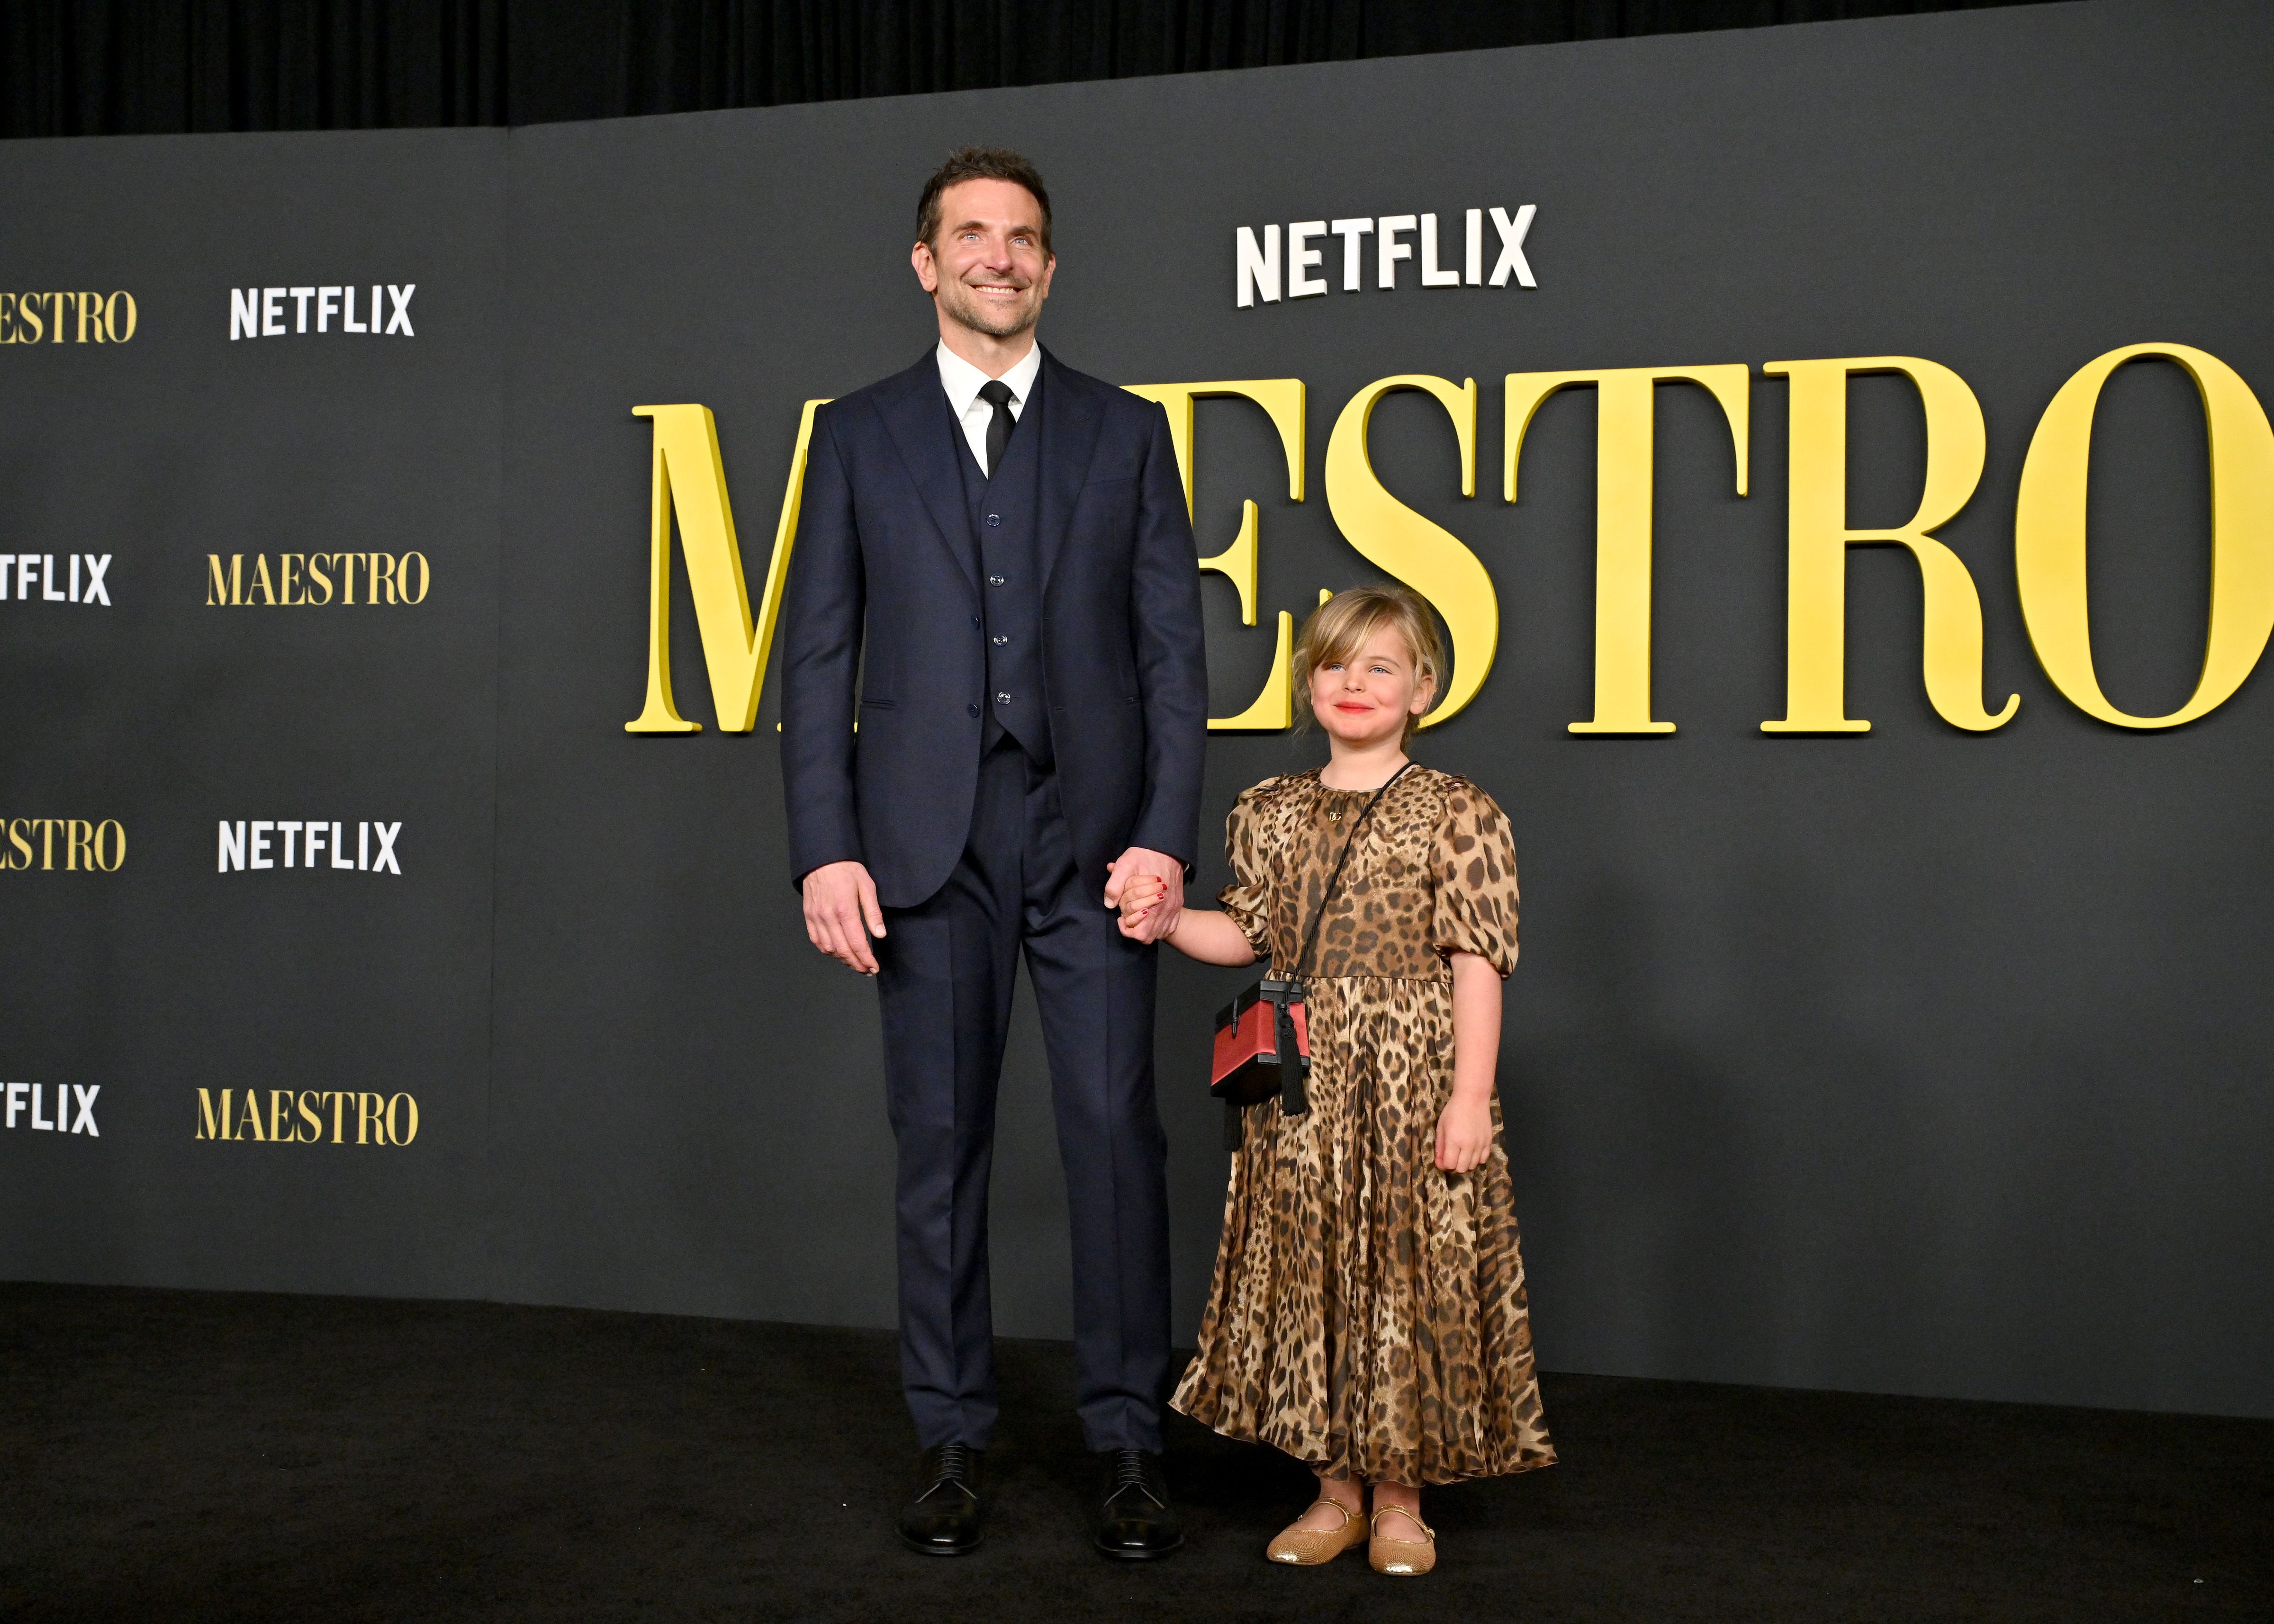 Bradley Cooper and Lea De Seine Shayk Cooper during Netflix's "Maestro" Los Angeles Photo Call at Academy Museum of Motion Pictures on December 12, 2023, in Los Angeles, California. | Source: Getty Images